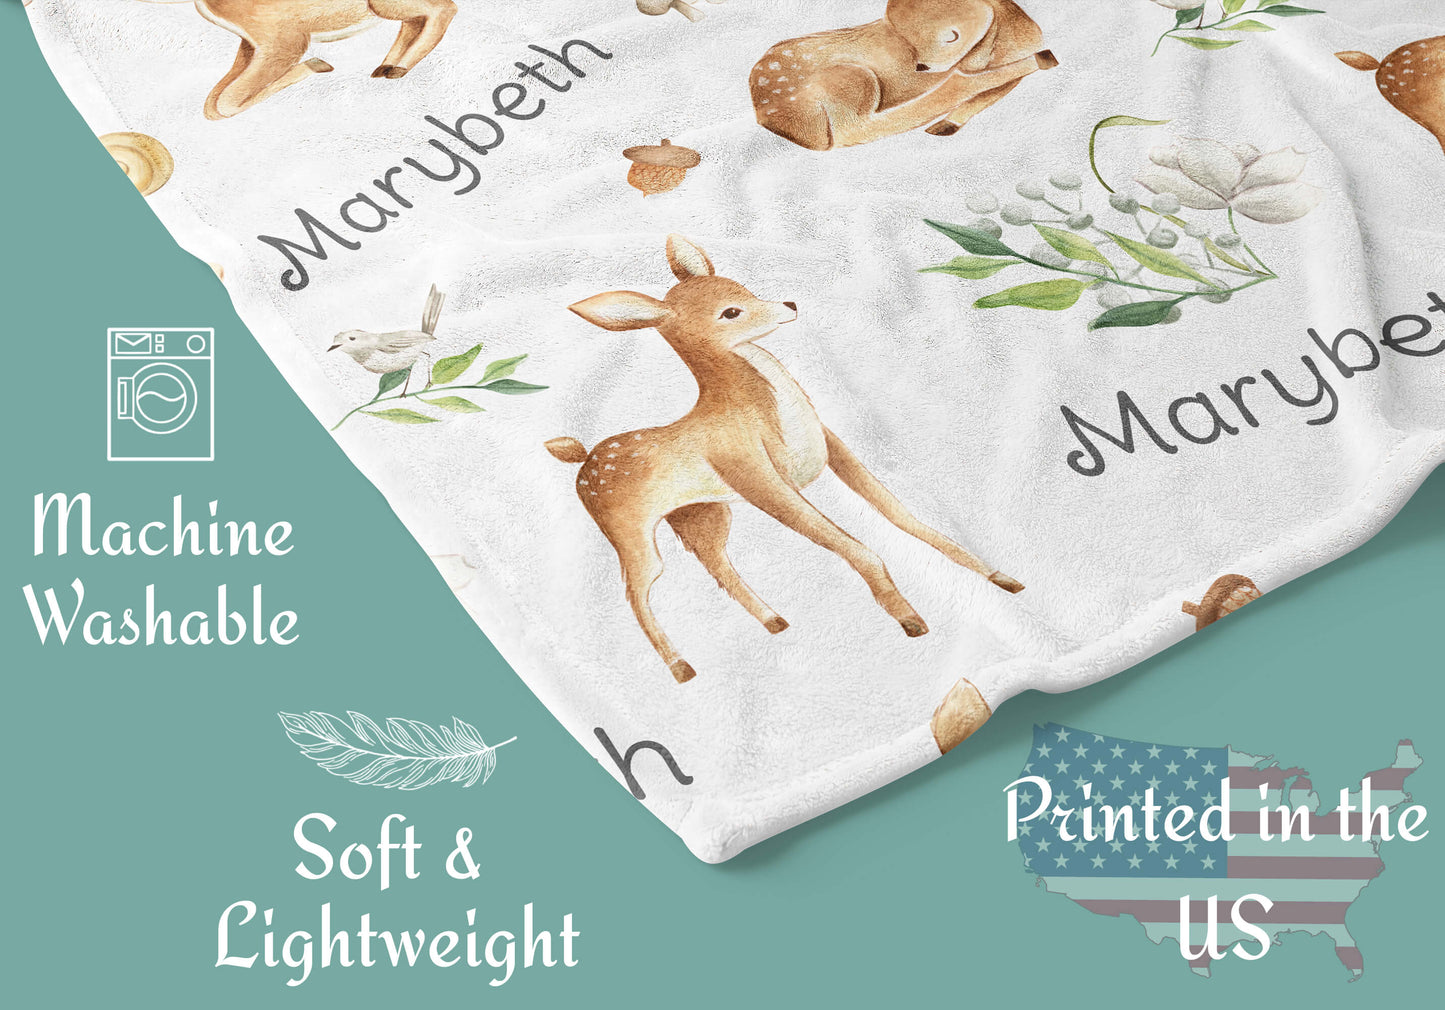 Unisex Personalized Blanket with Name and Baby Deers